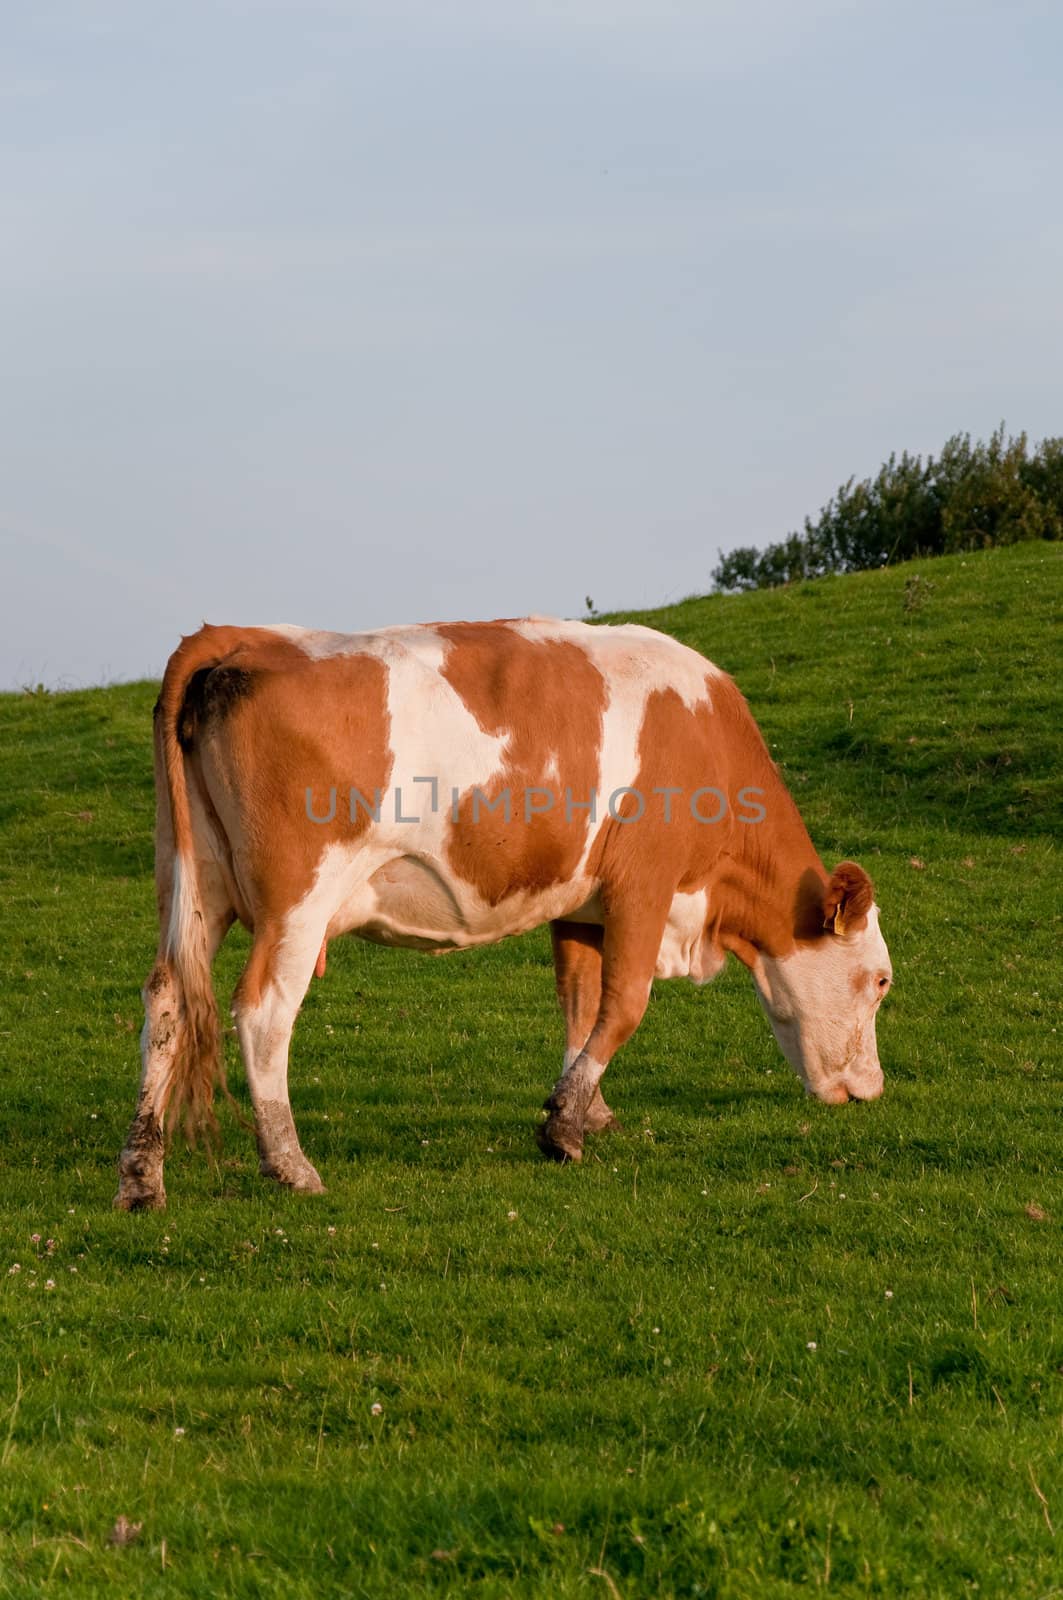 Brown and white cow on a green grassy hill eating grass